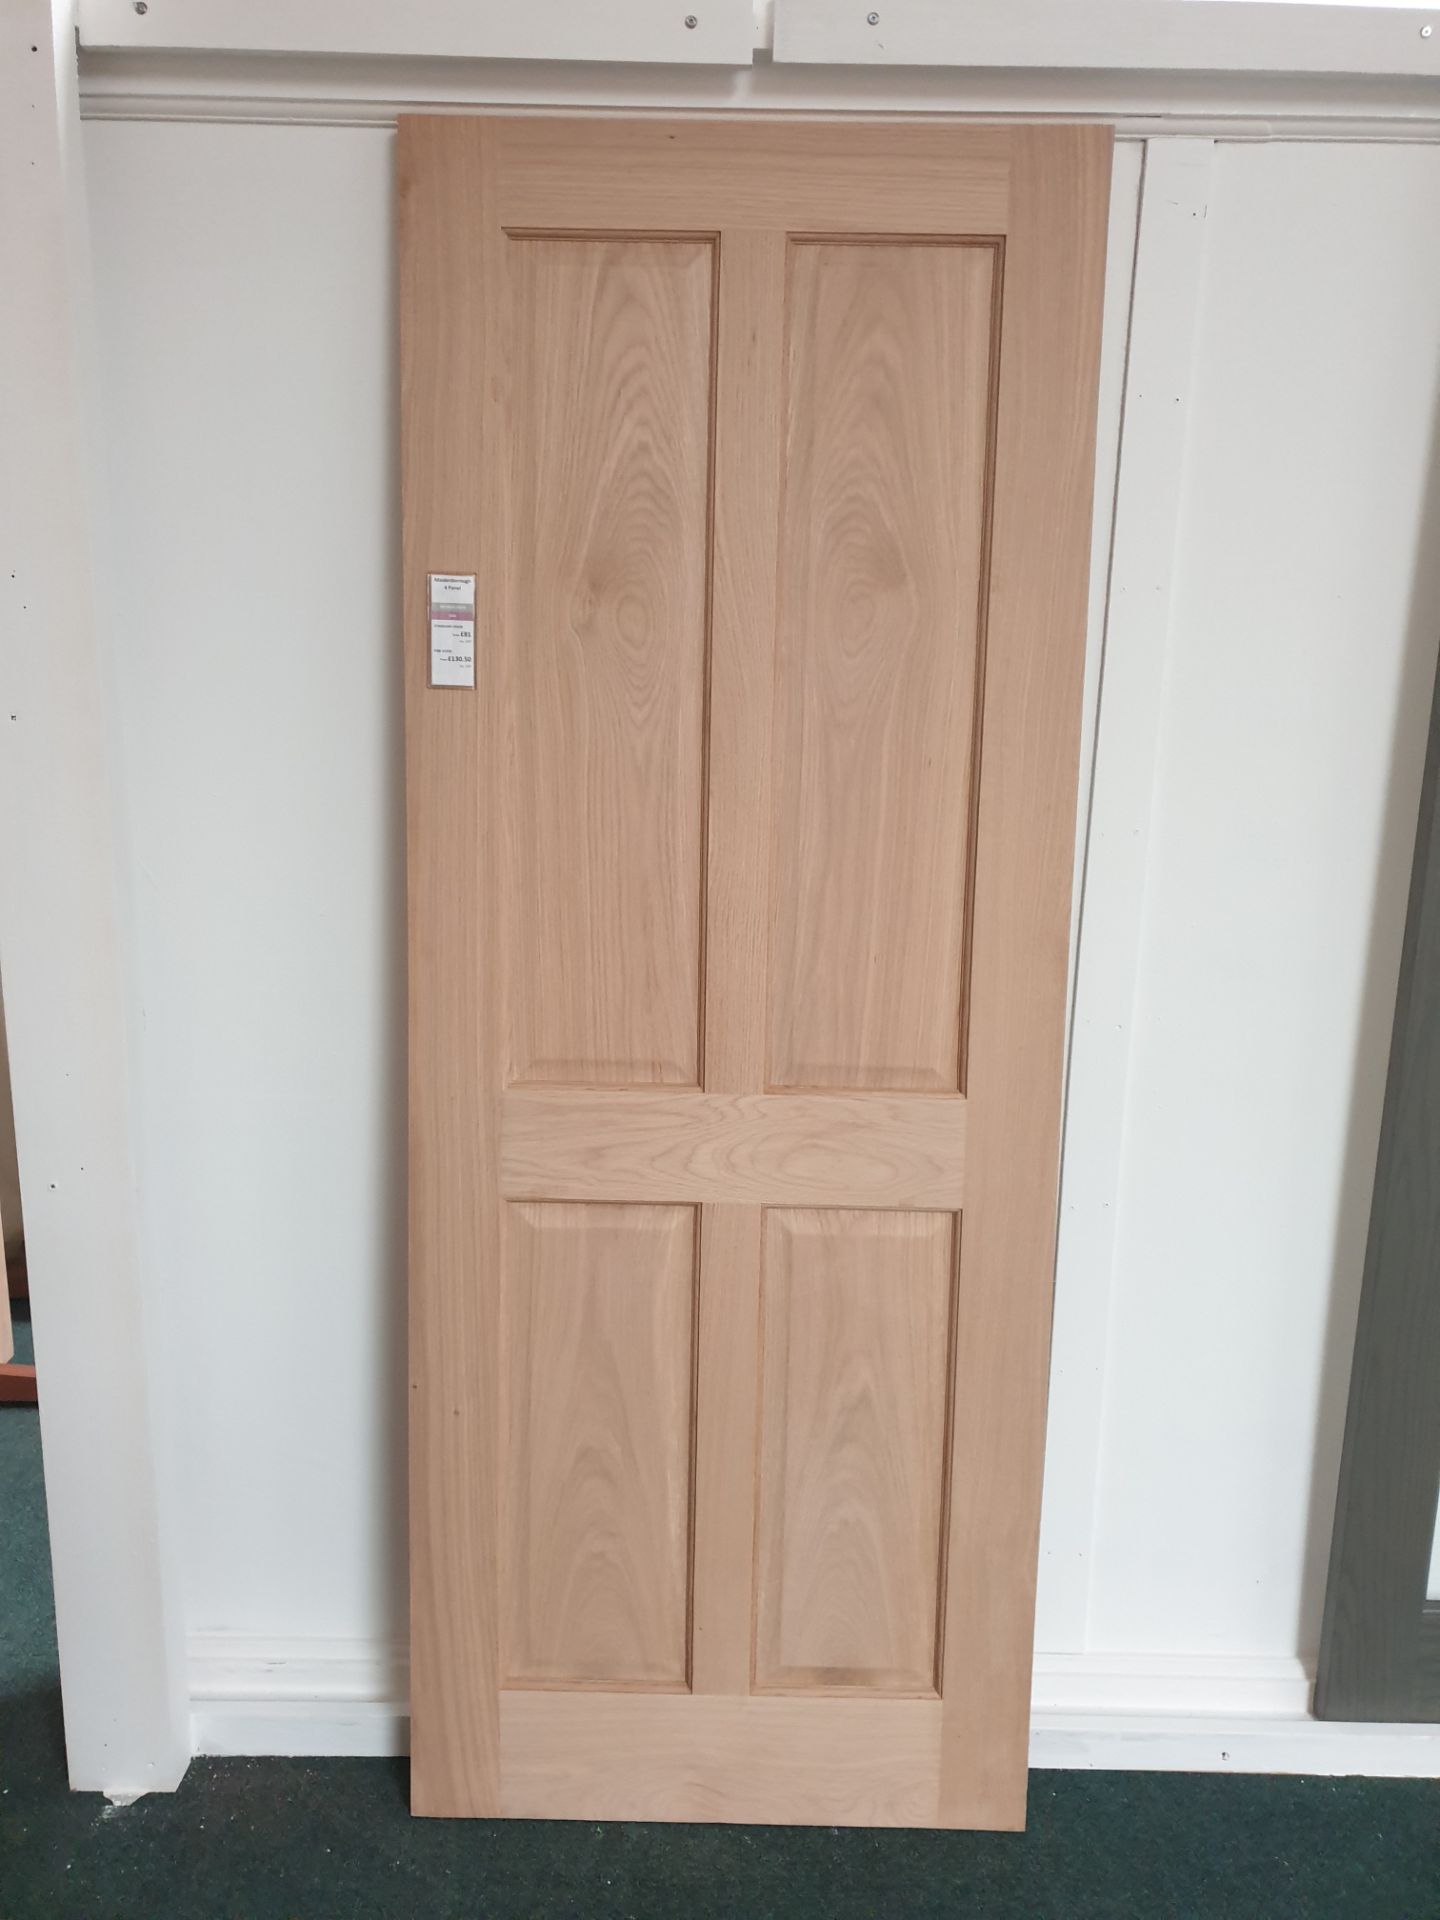 2 x Maidenborough 4 Panel Internal Fire Doors AWOMA14P33FD 78”x33”x44mm - Lots to be handed out in